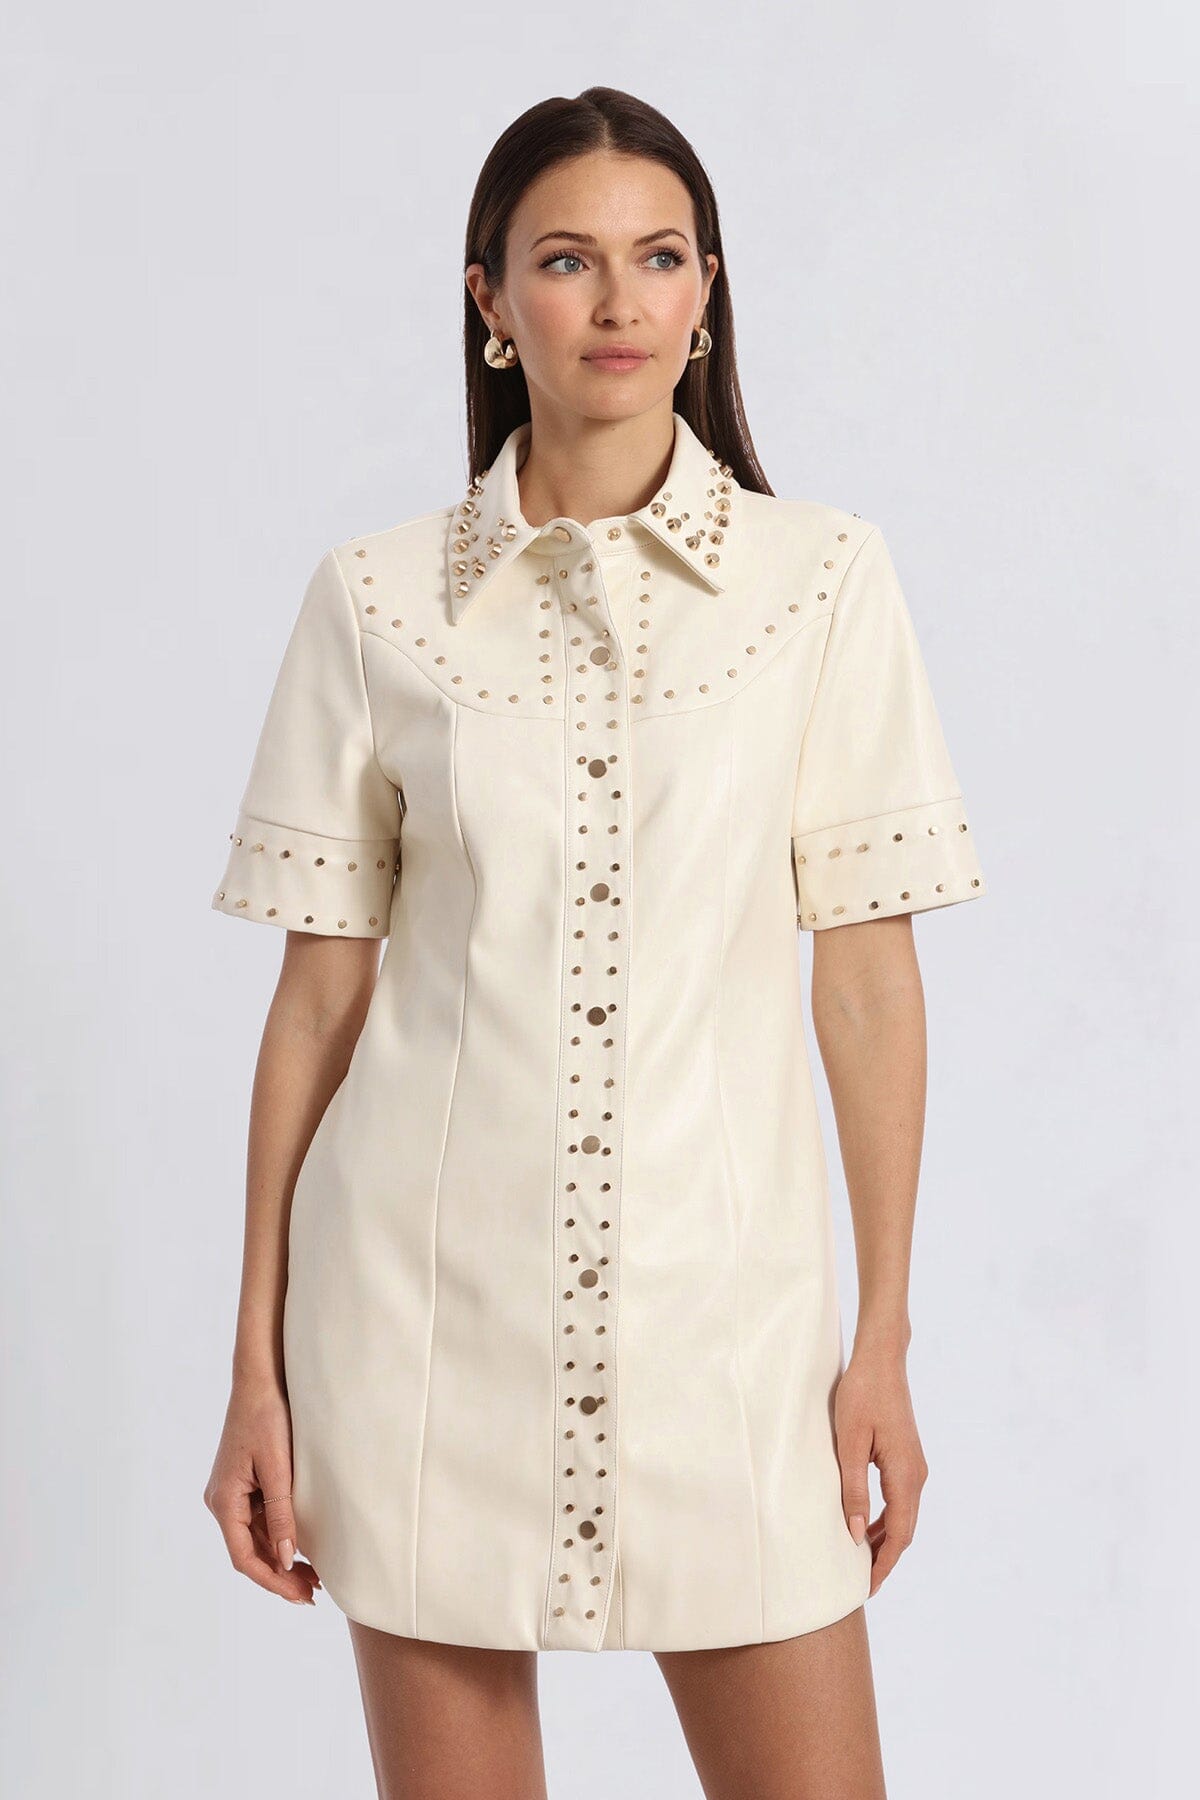 White Faux Leather Short Sleeve Mini Shirtdress with Studs - Cute designer fashion dresses by Avec Les Filles 